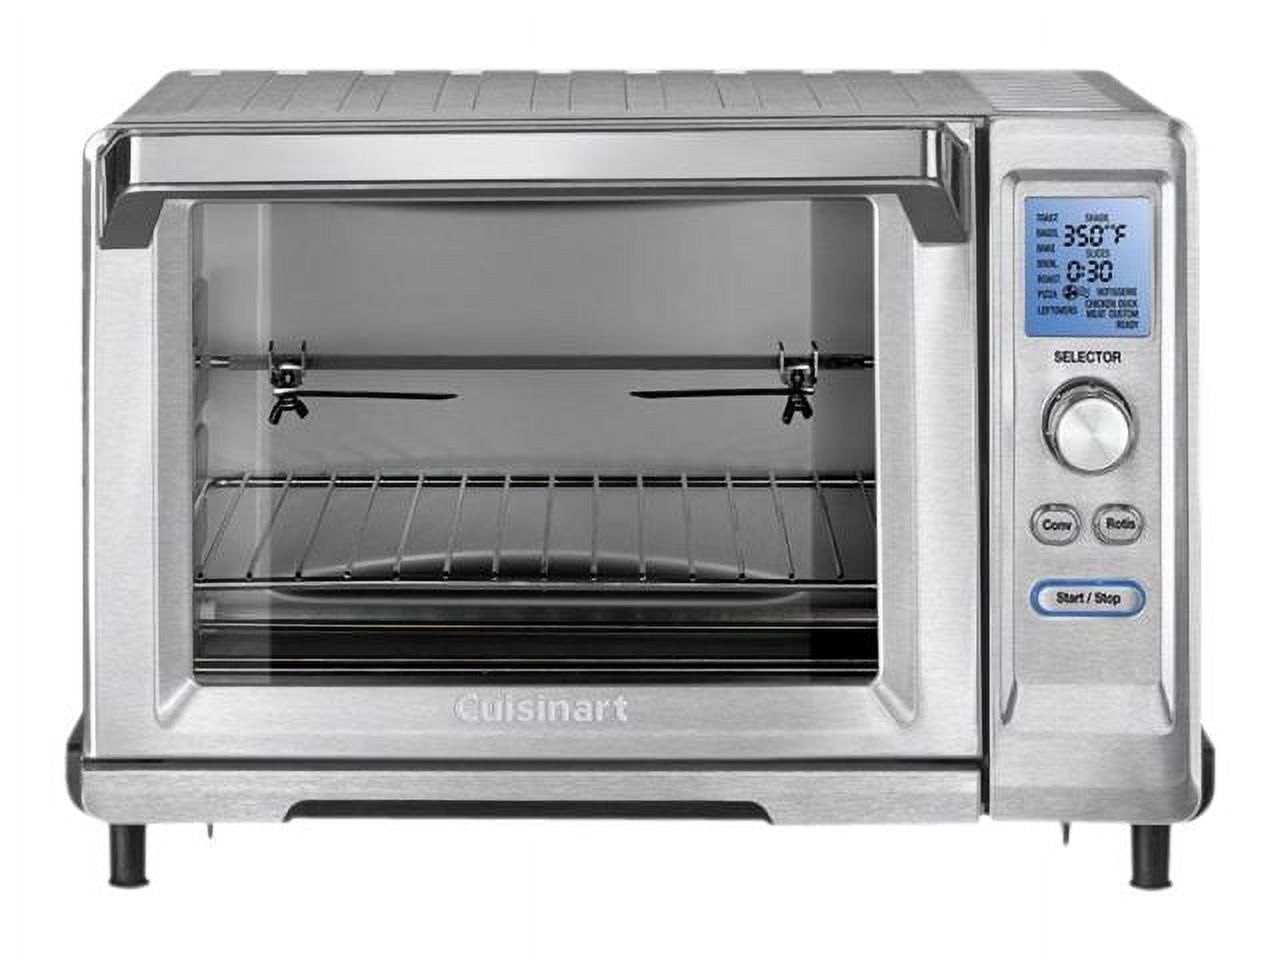 Cuisinart TOB-200 - Electric oven - 24 qt - 1.9 kW - brushed stainless steel - image 1 of 4